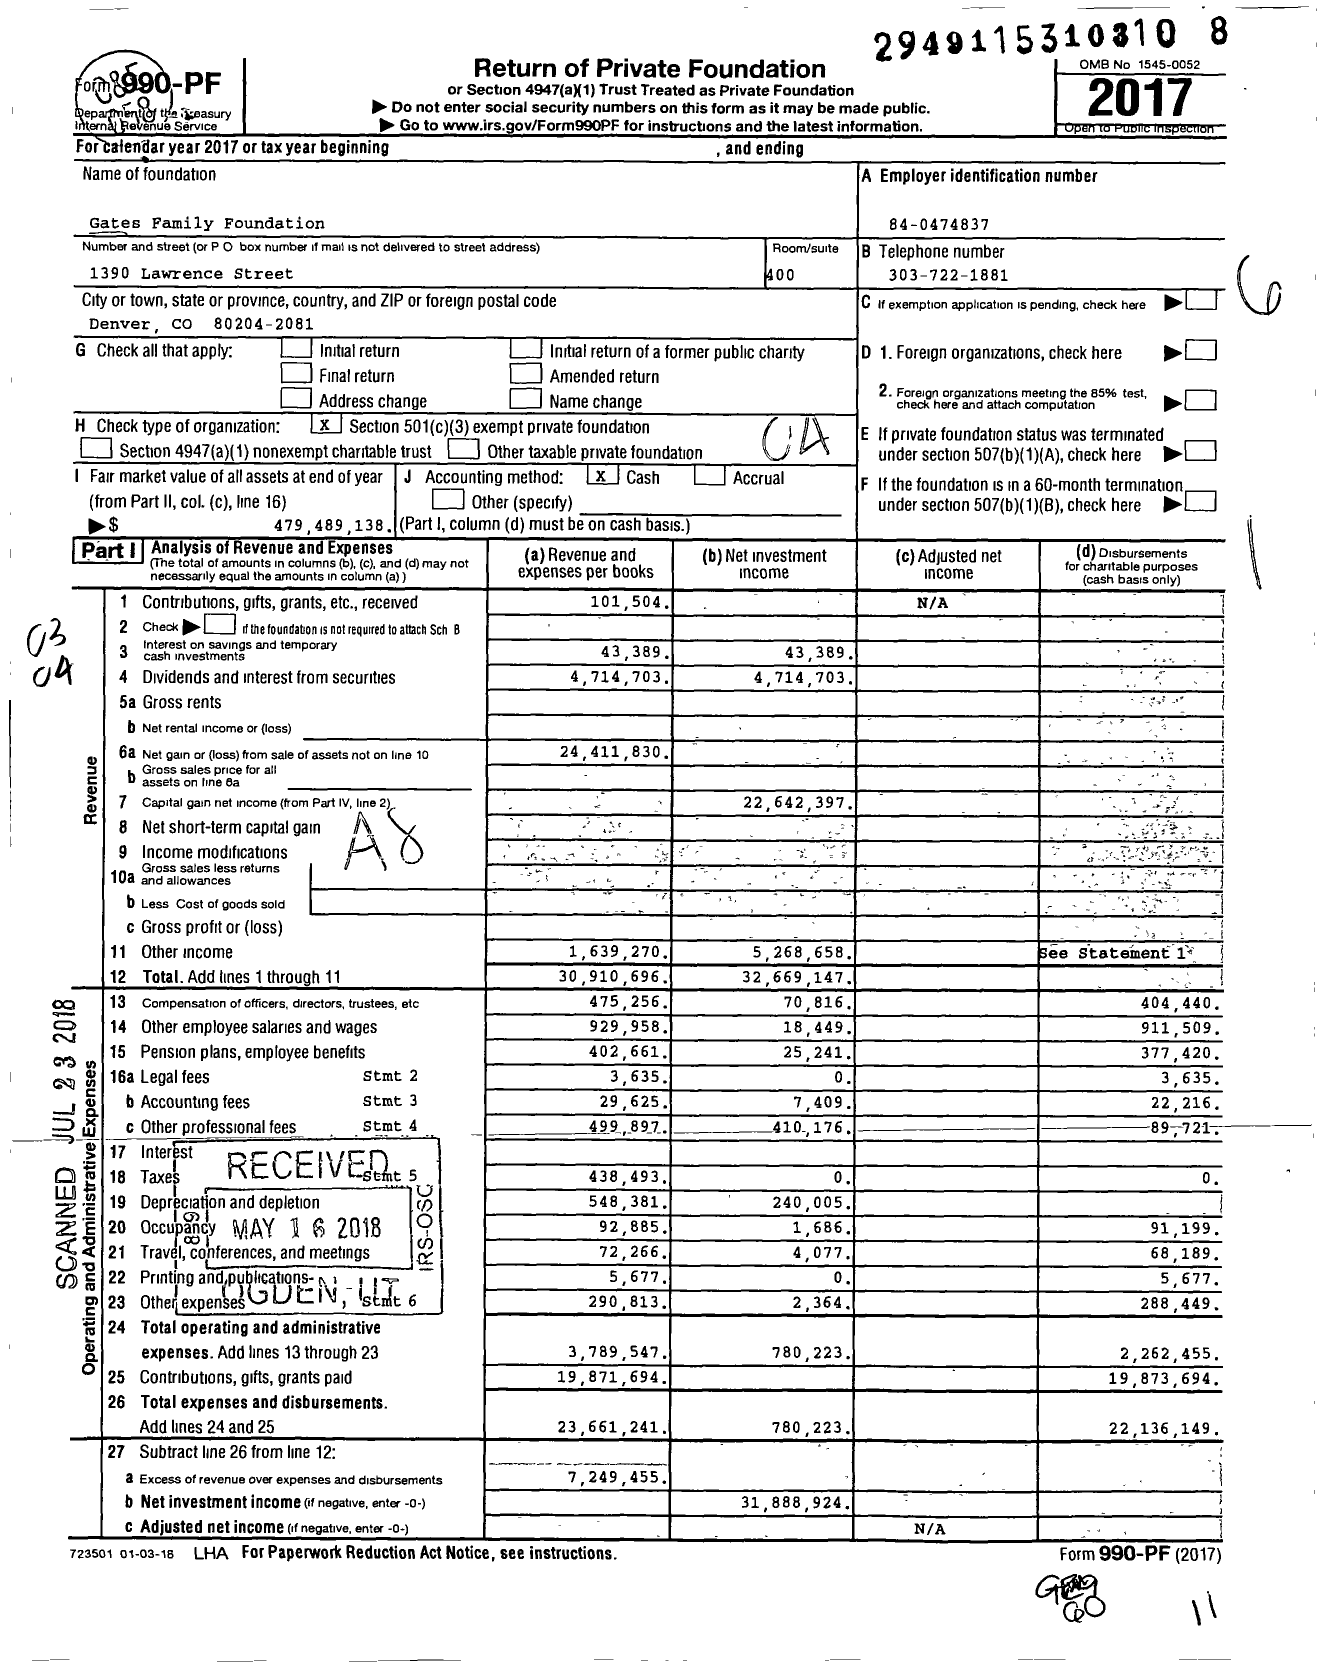 Image of first page of 2017 Form 990PF for Gates Family Foundation (GFF)